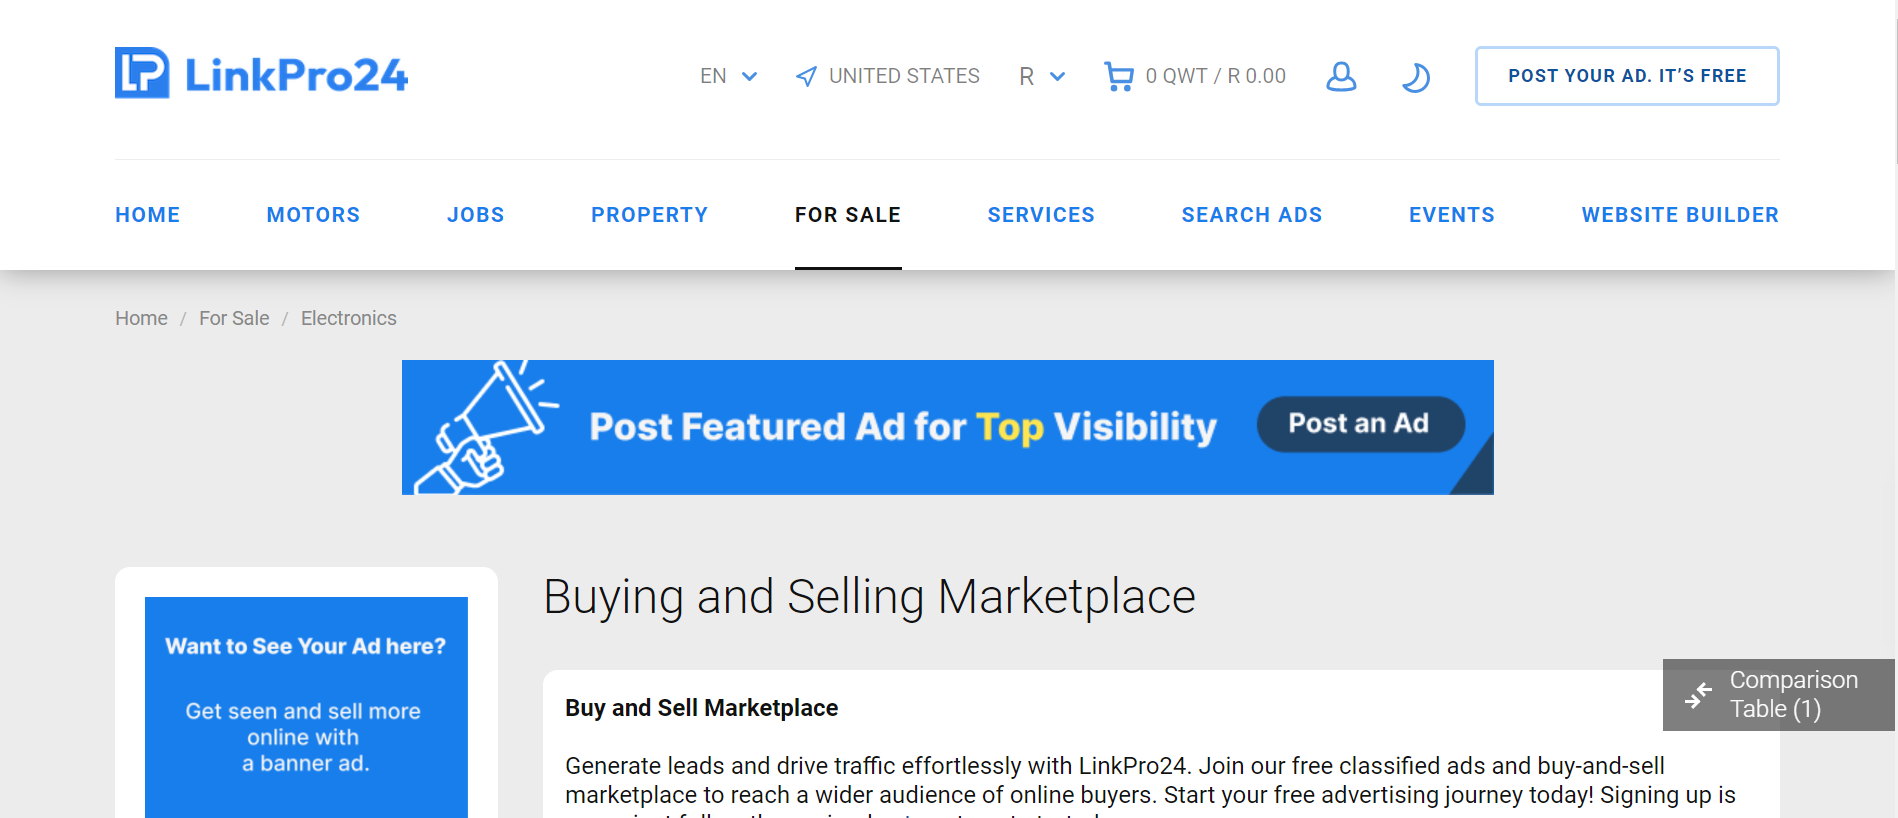 LinkPro24 Marketplace - Buy and sell online for free